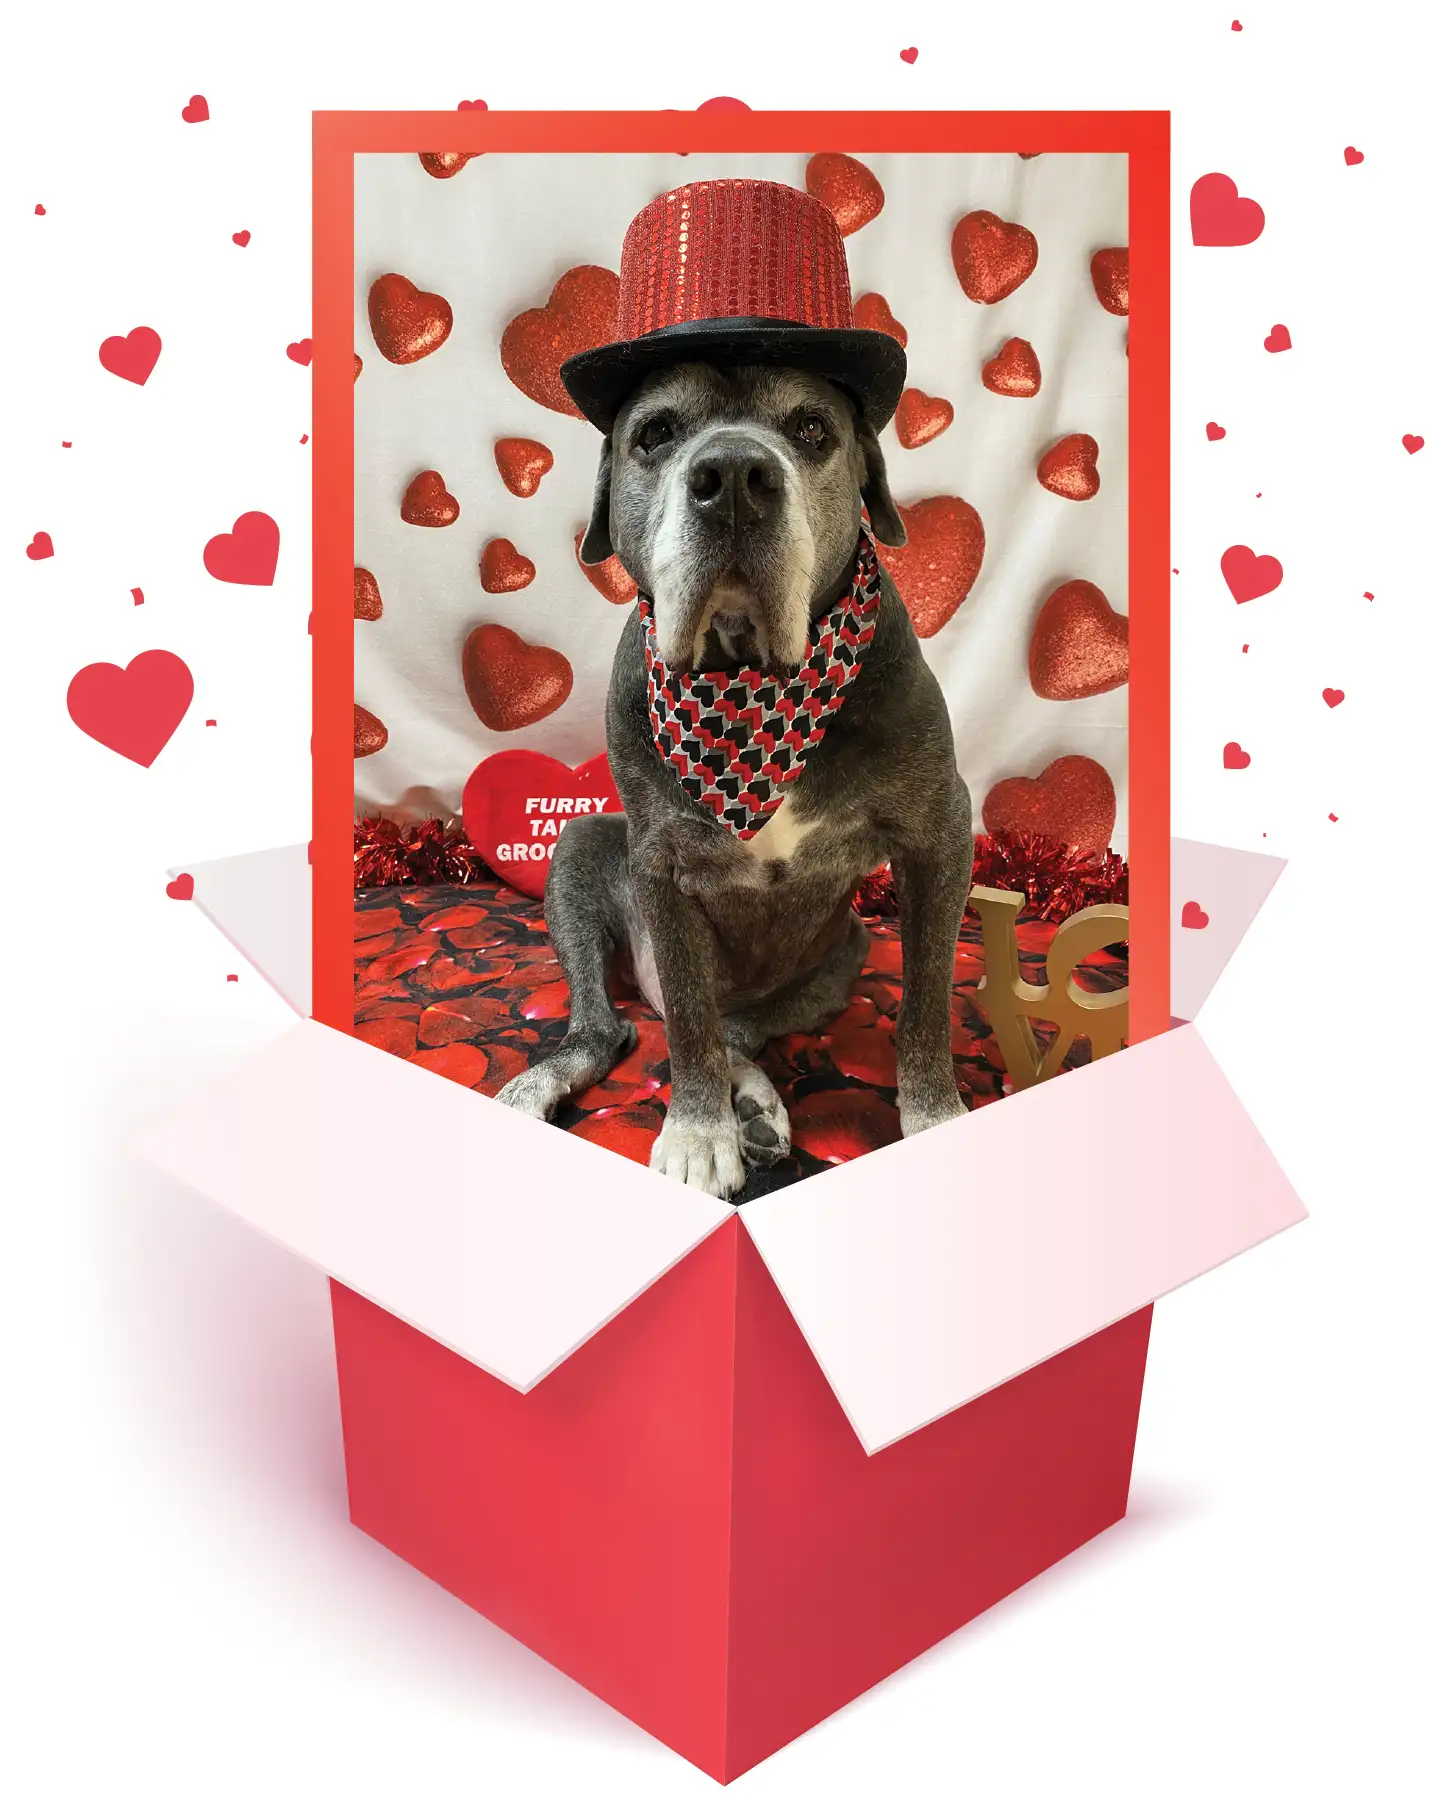 Hooch in red box with red hat and hearts surrounding